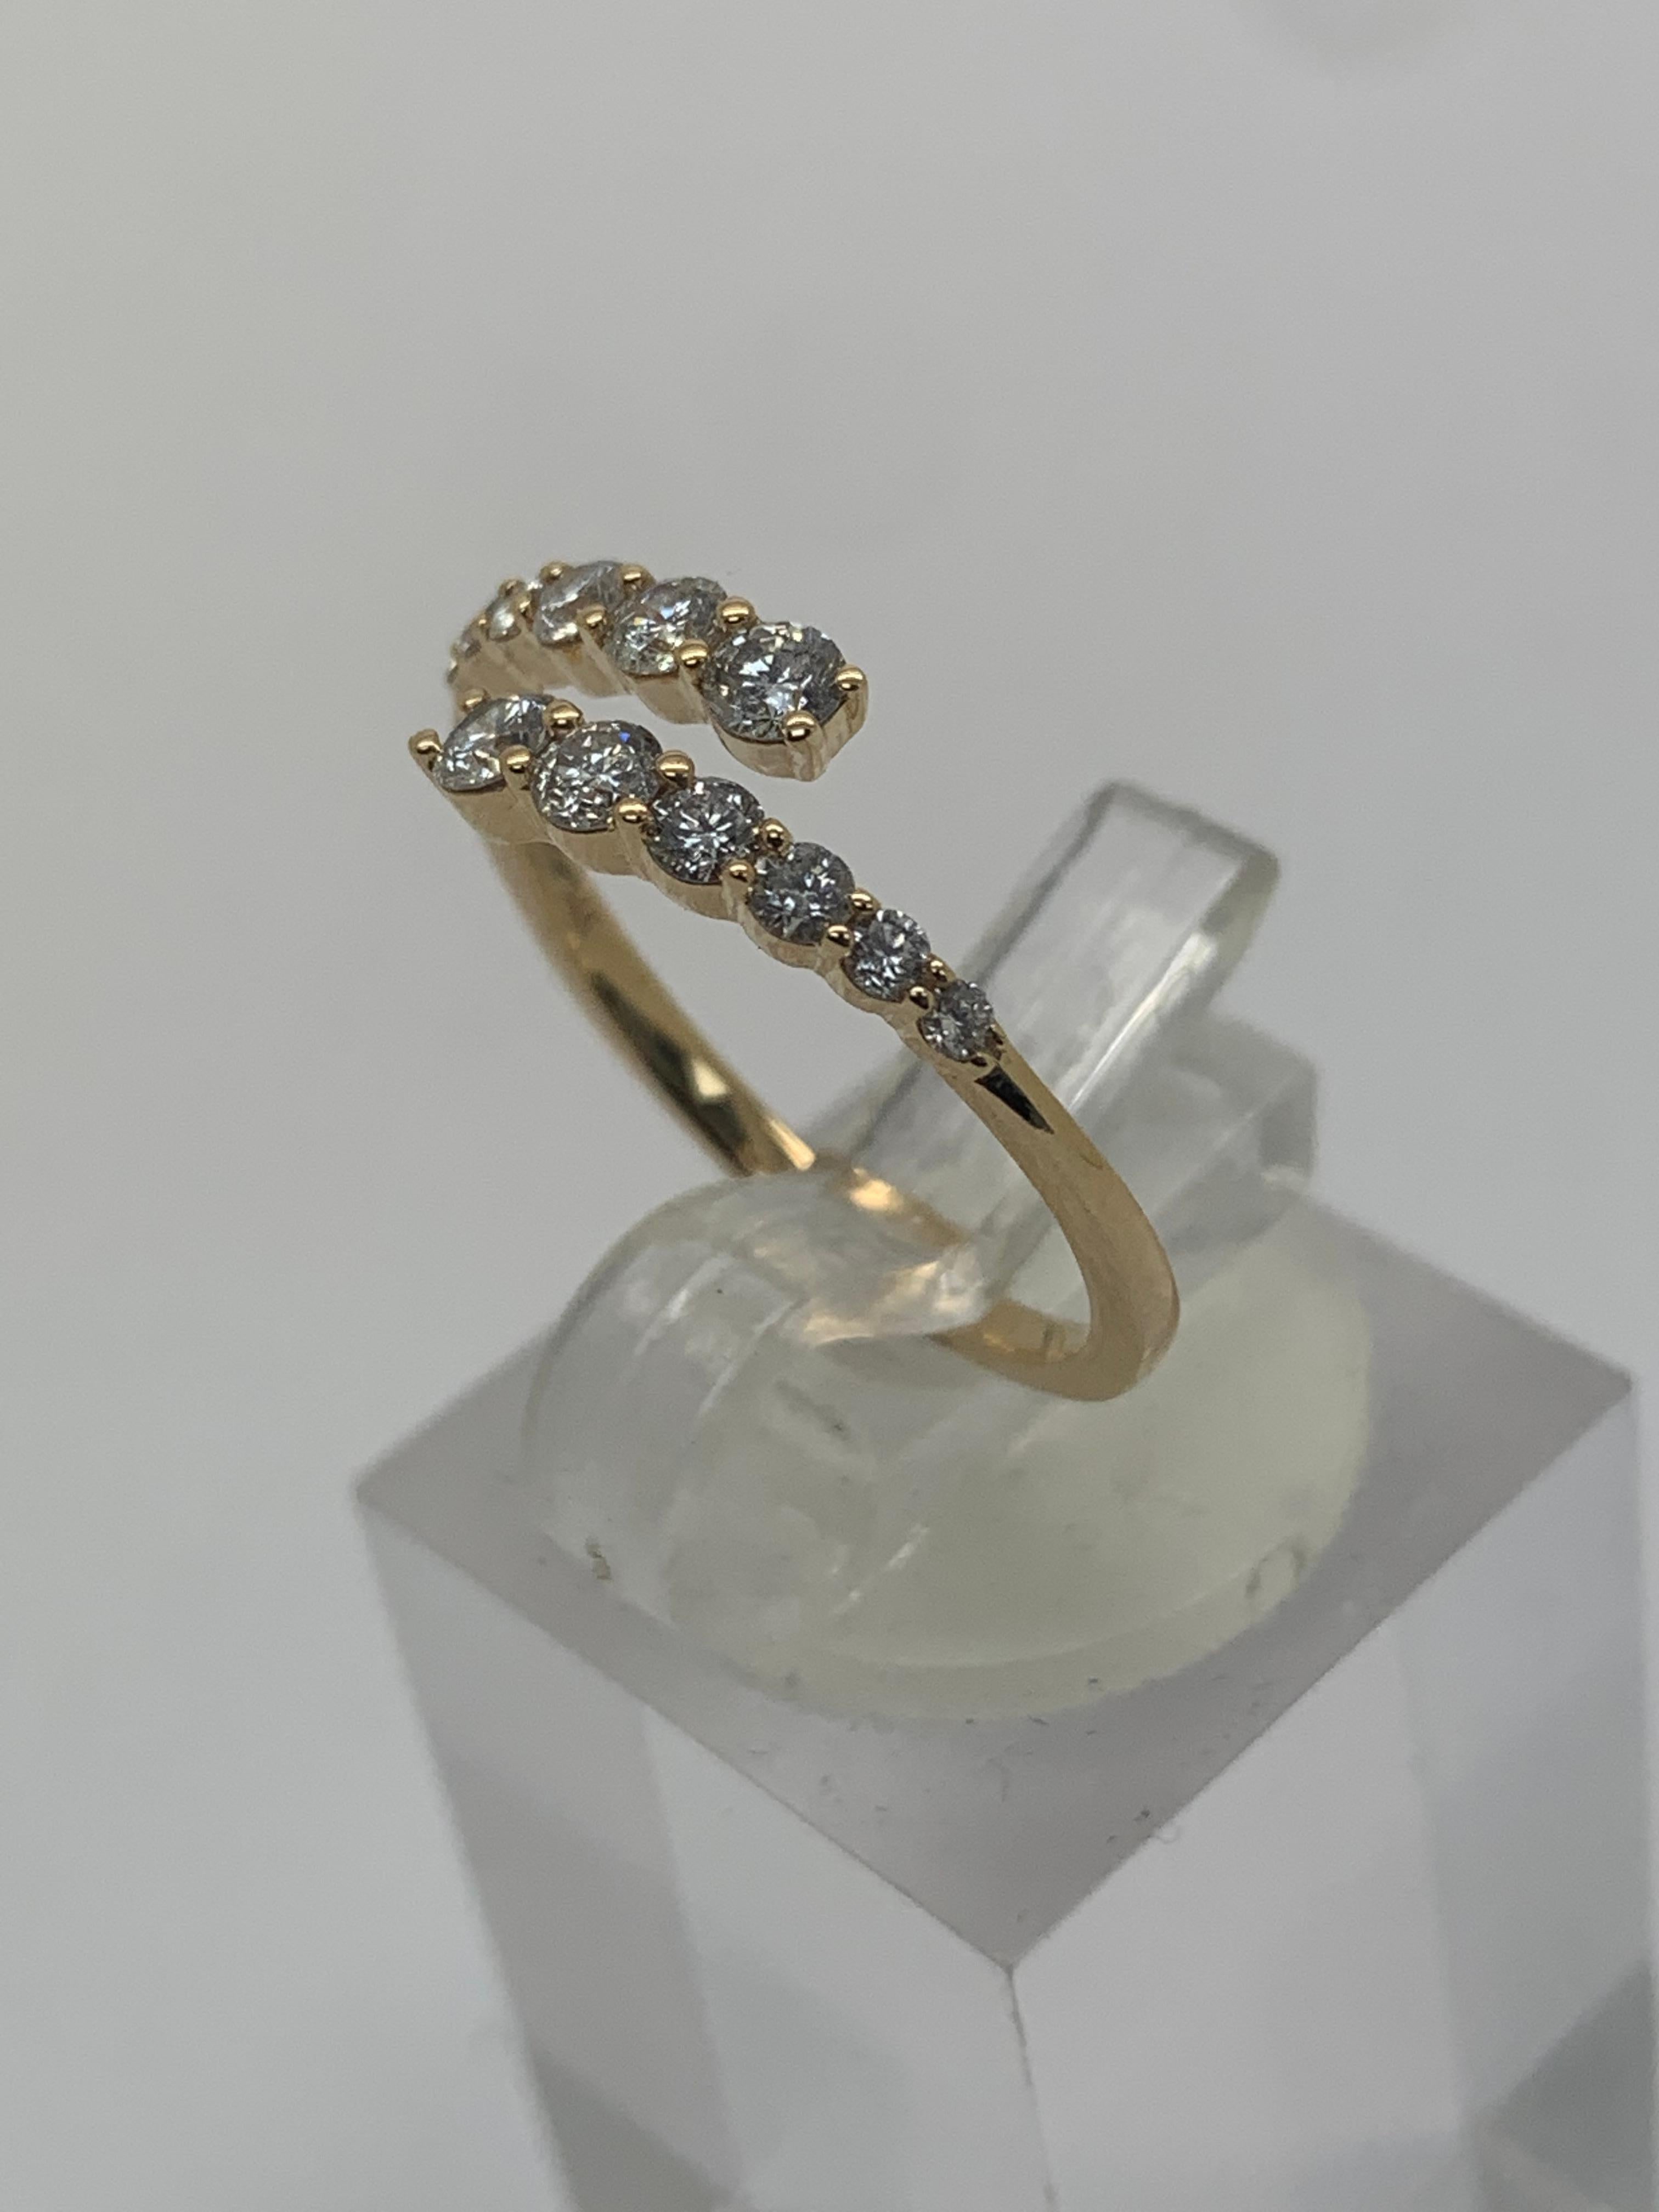 Up for sale:

This absolutely stunning solid 14k Yellow Gold .50cttw Diamond Cocktail Ring. This ring is featuring .50cttw in natural diamonds; G color; SI1 clarity; very good cut--Amazing life and brilliance!

These diamonds HAVE NOT been clarity